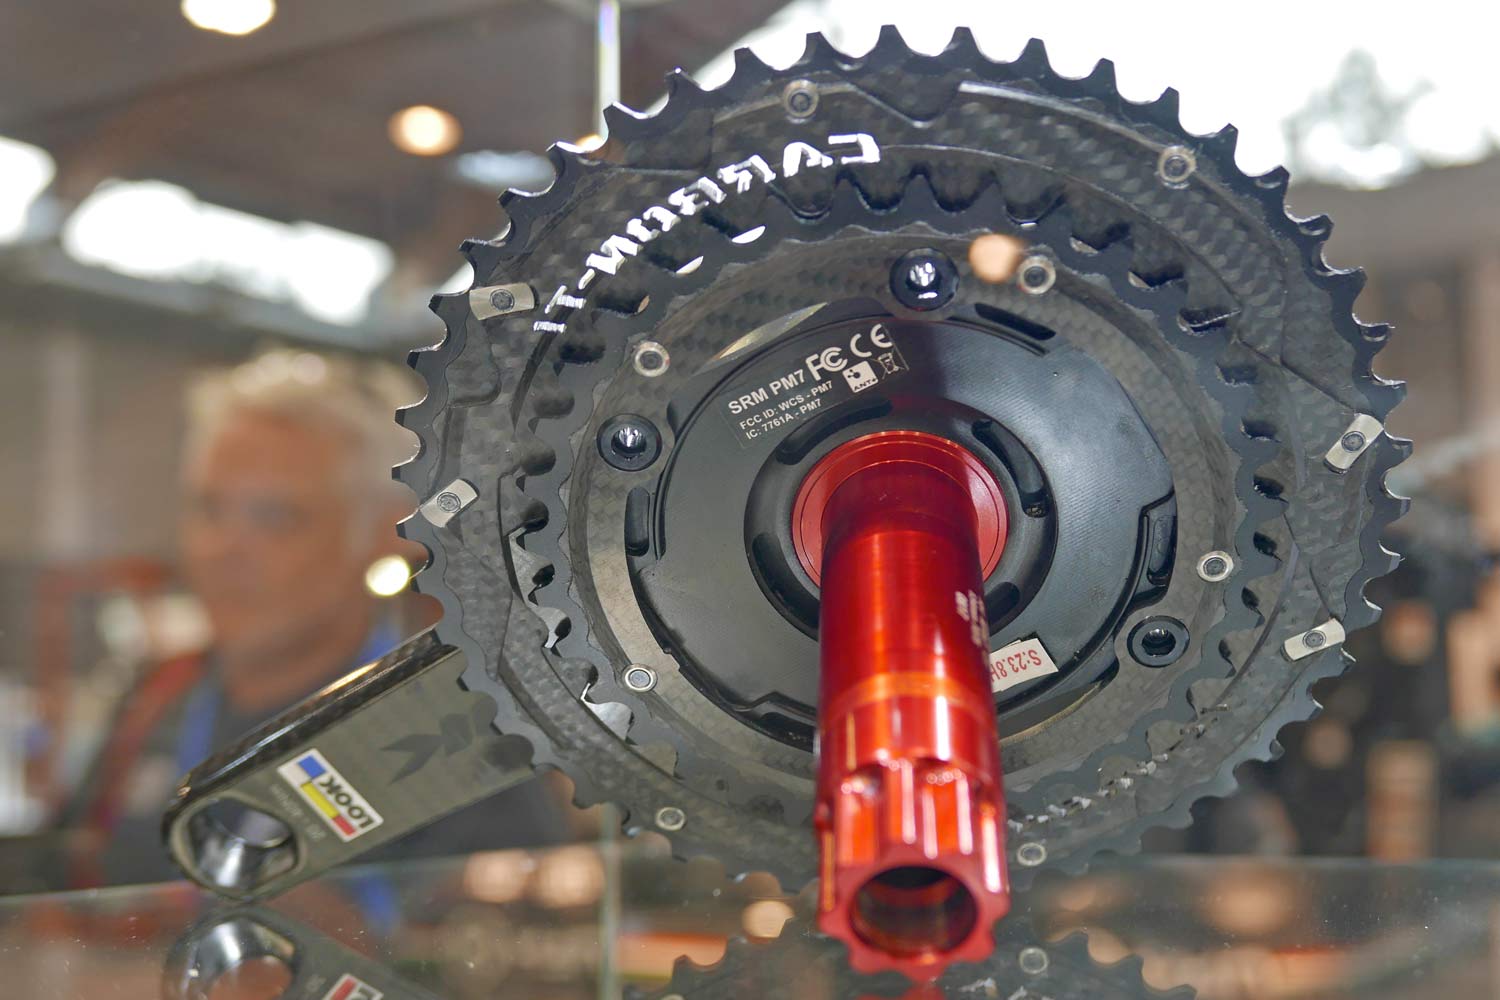 Carbon-Ti gives all groups EVO carbon X-Carboring chainring upgrade, plus new UDH thru-axles